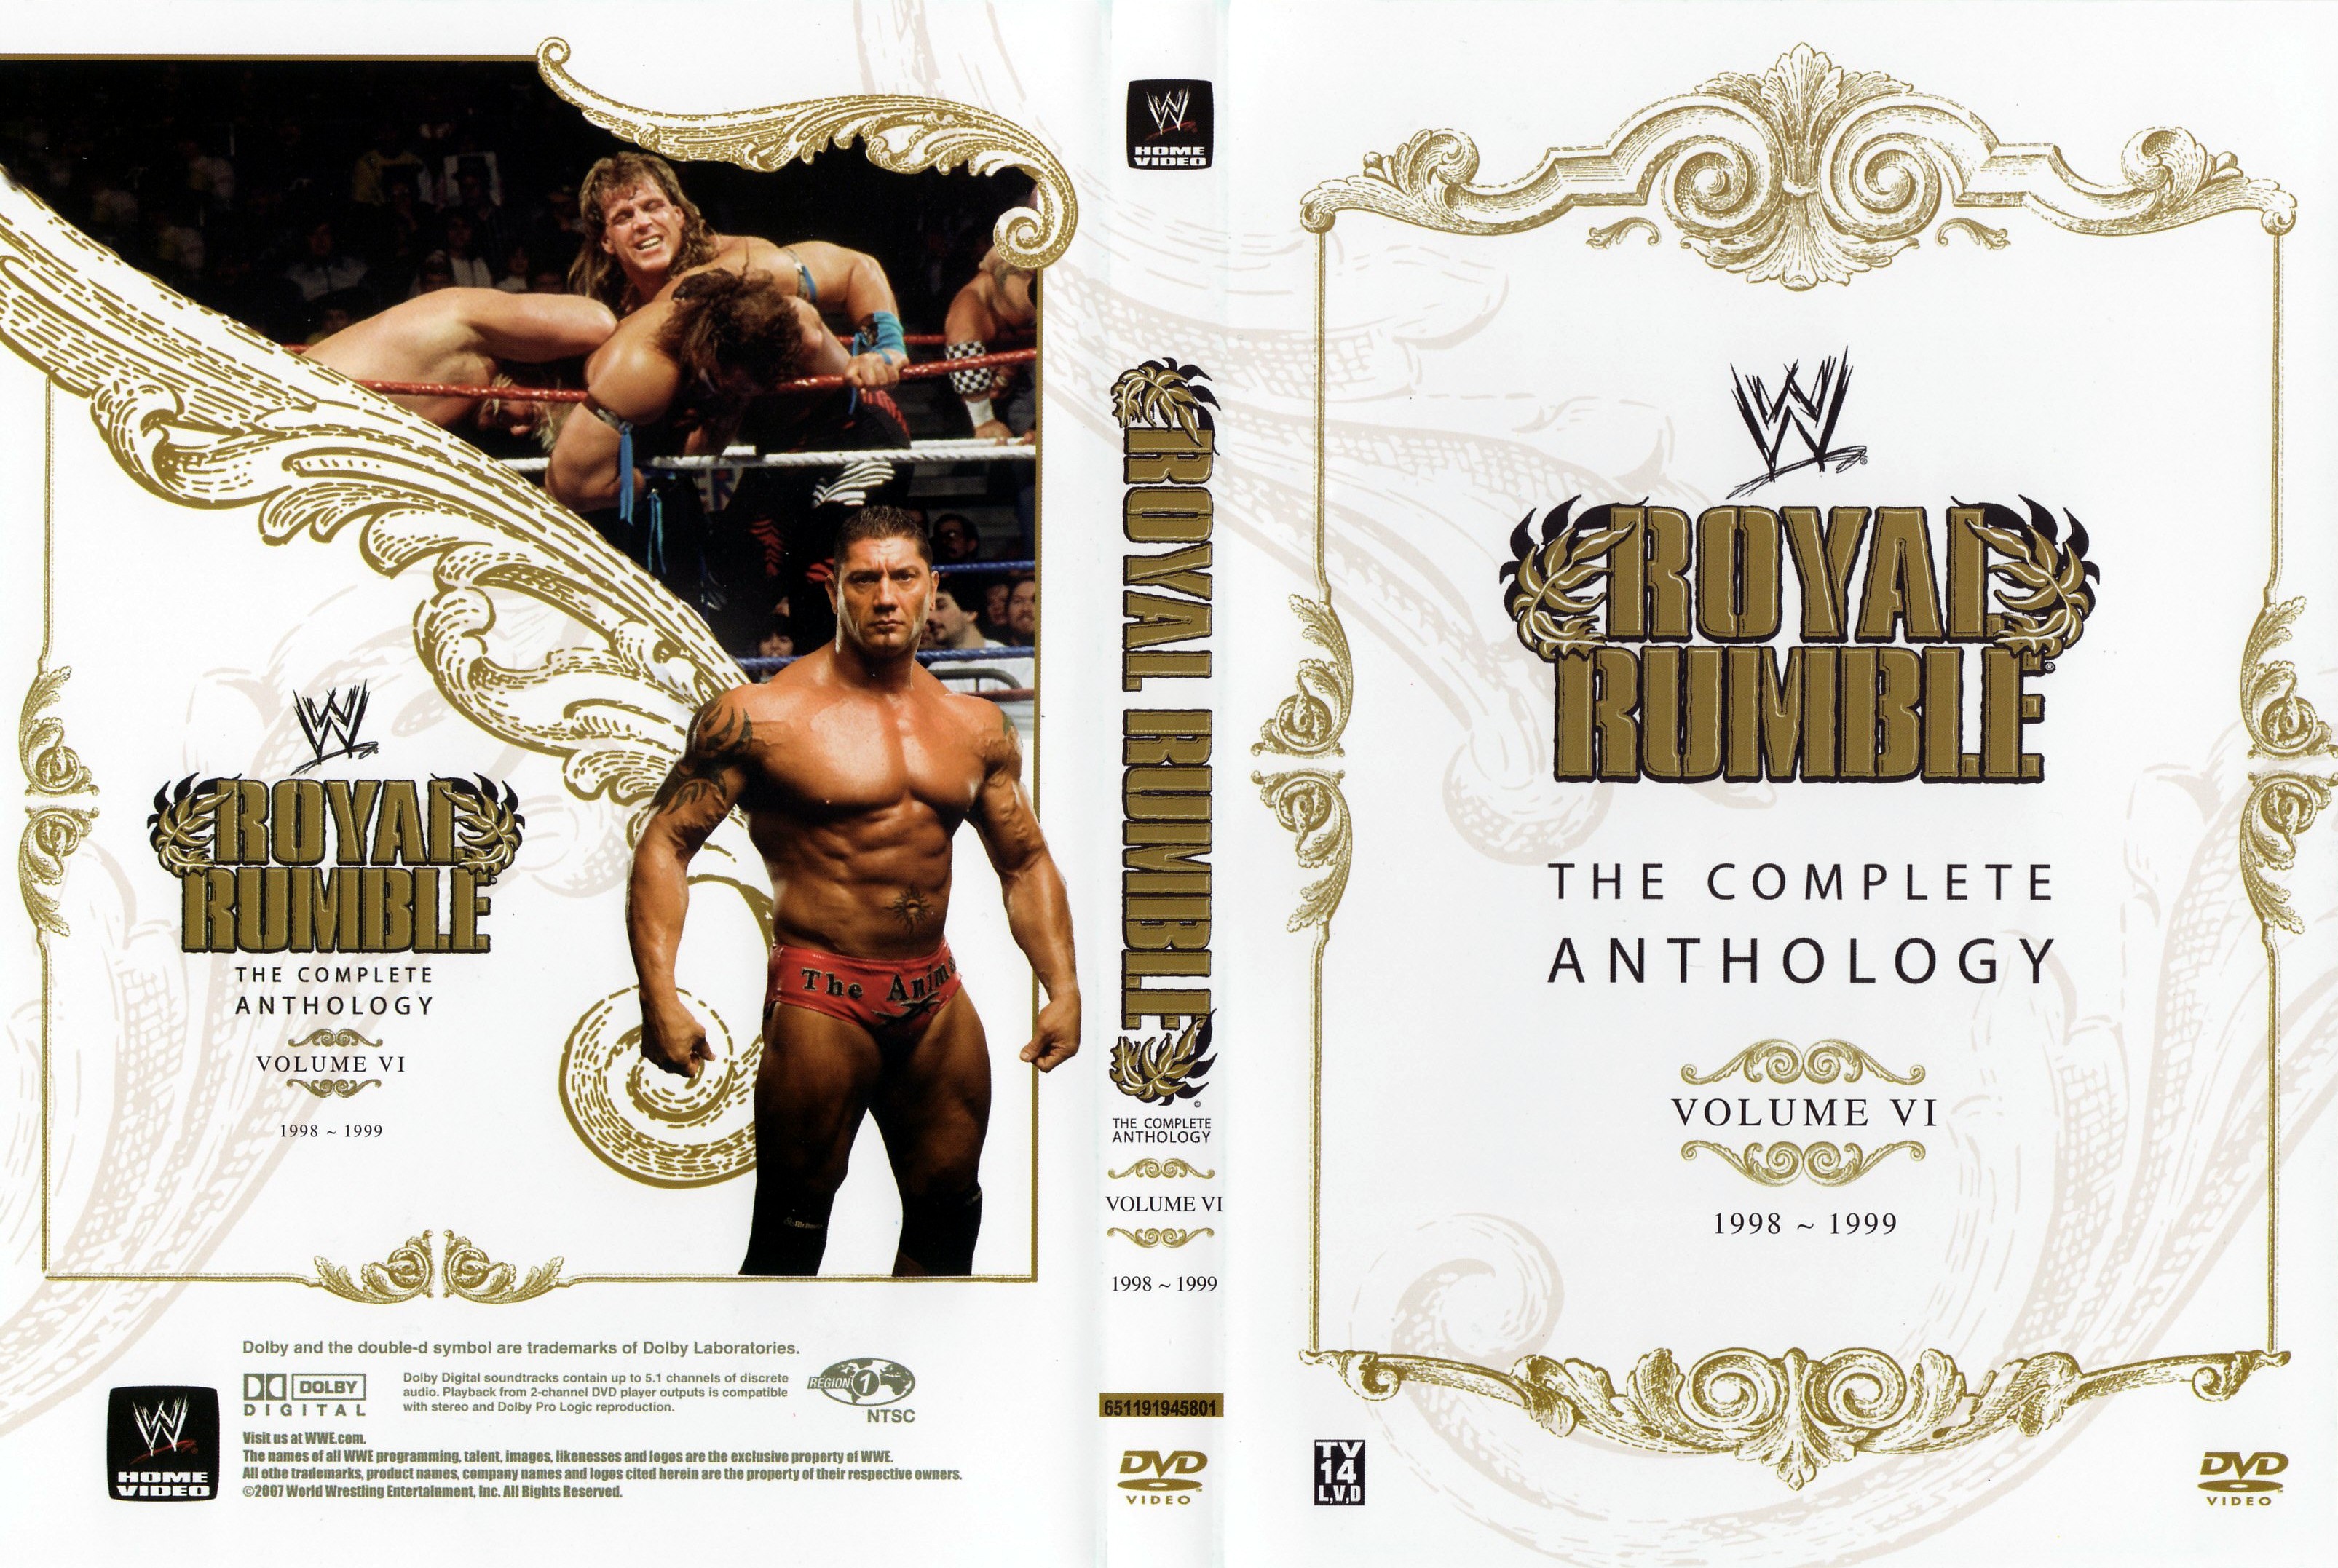 Jaquette DVD WWE Royal Rumble the complete antology vol 06